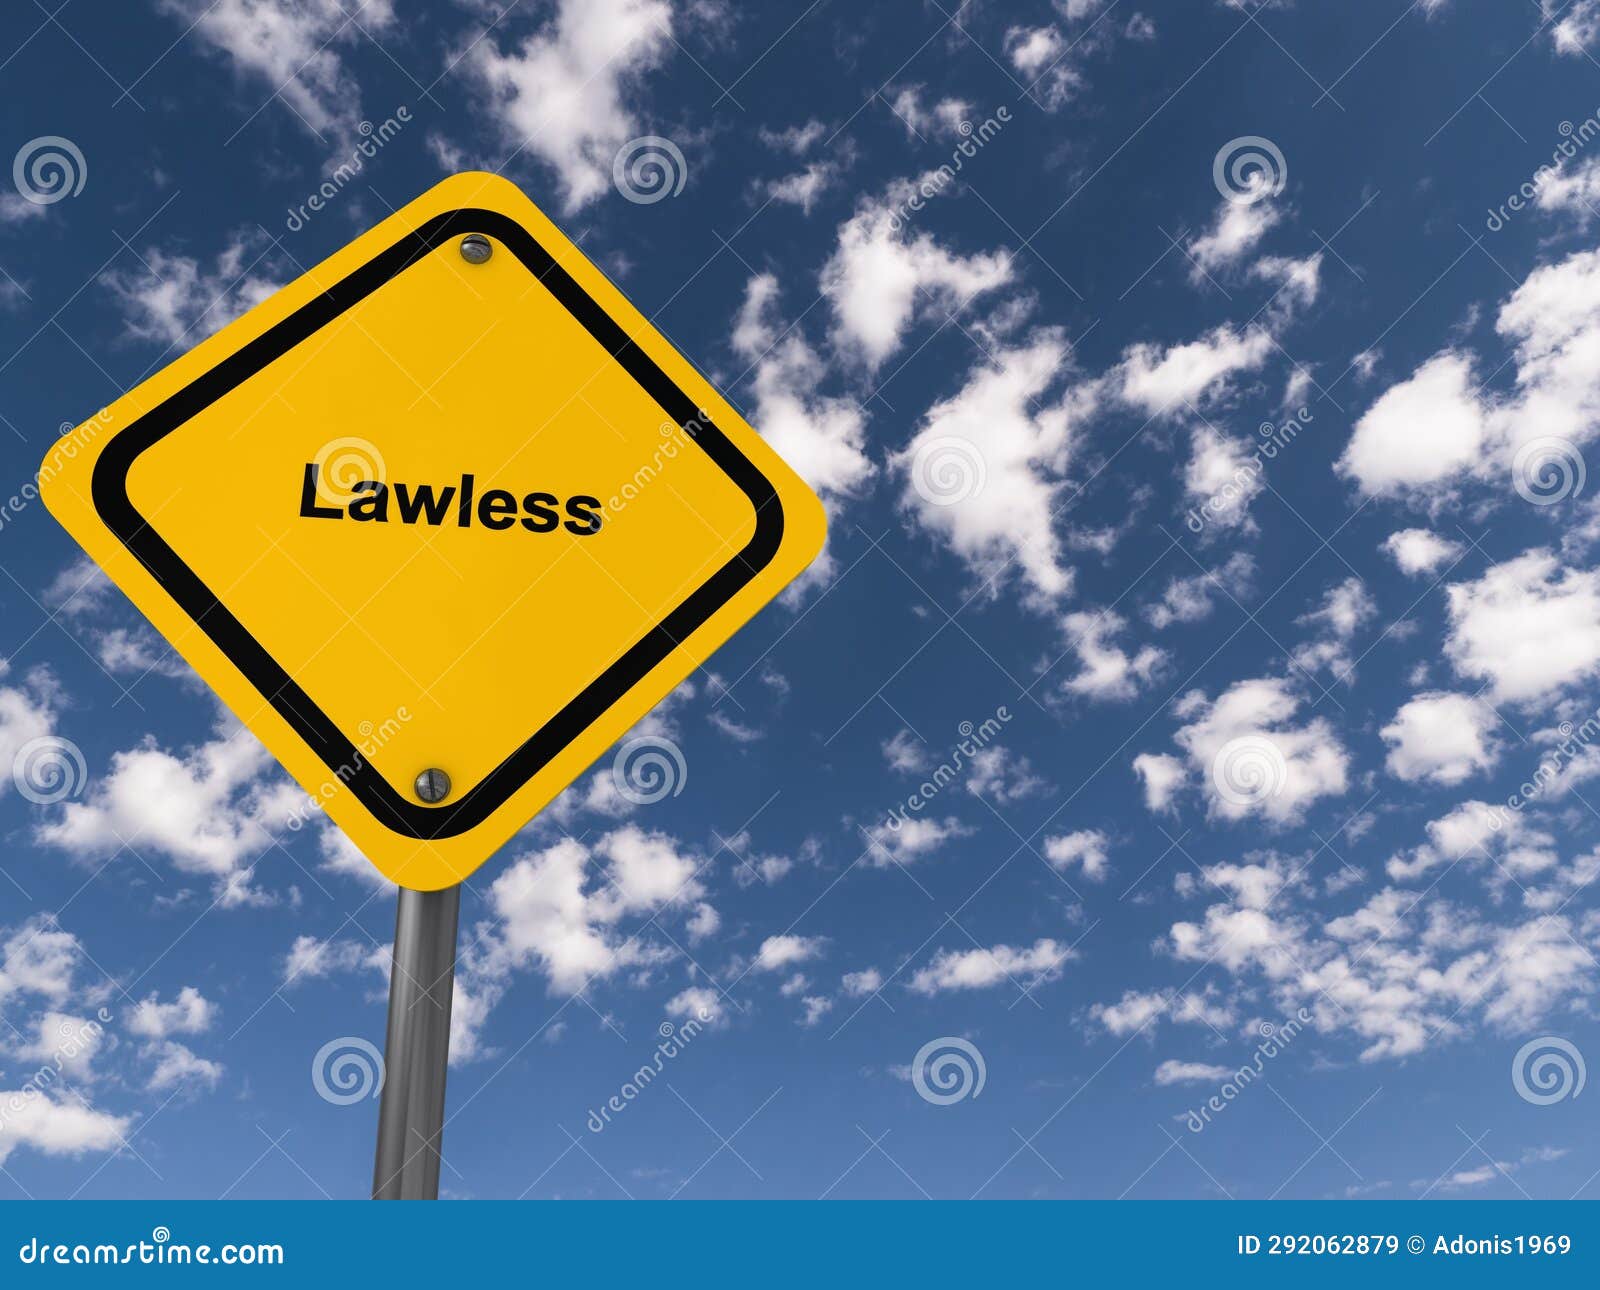 lawless traffic sign on blue sky